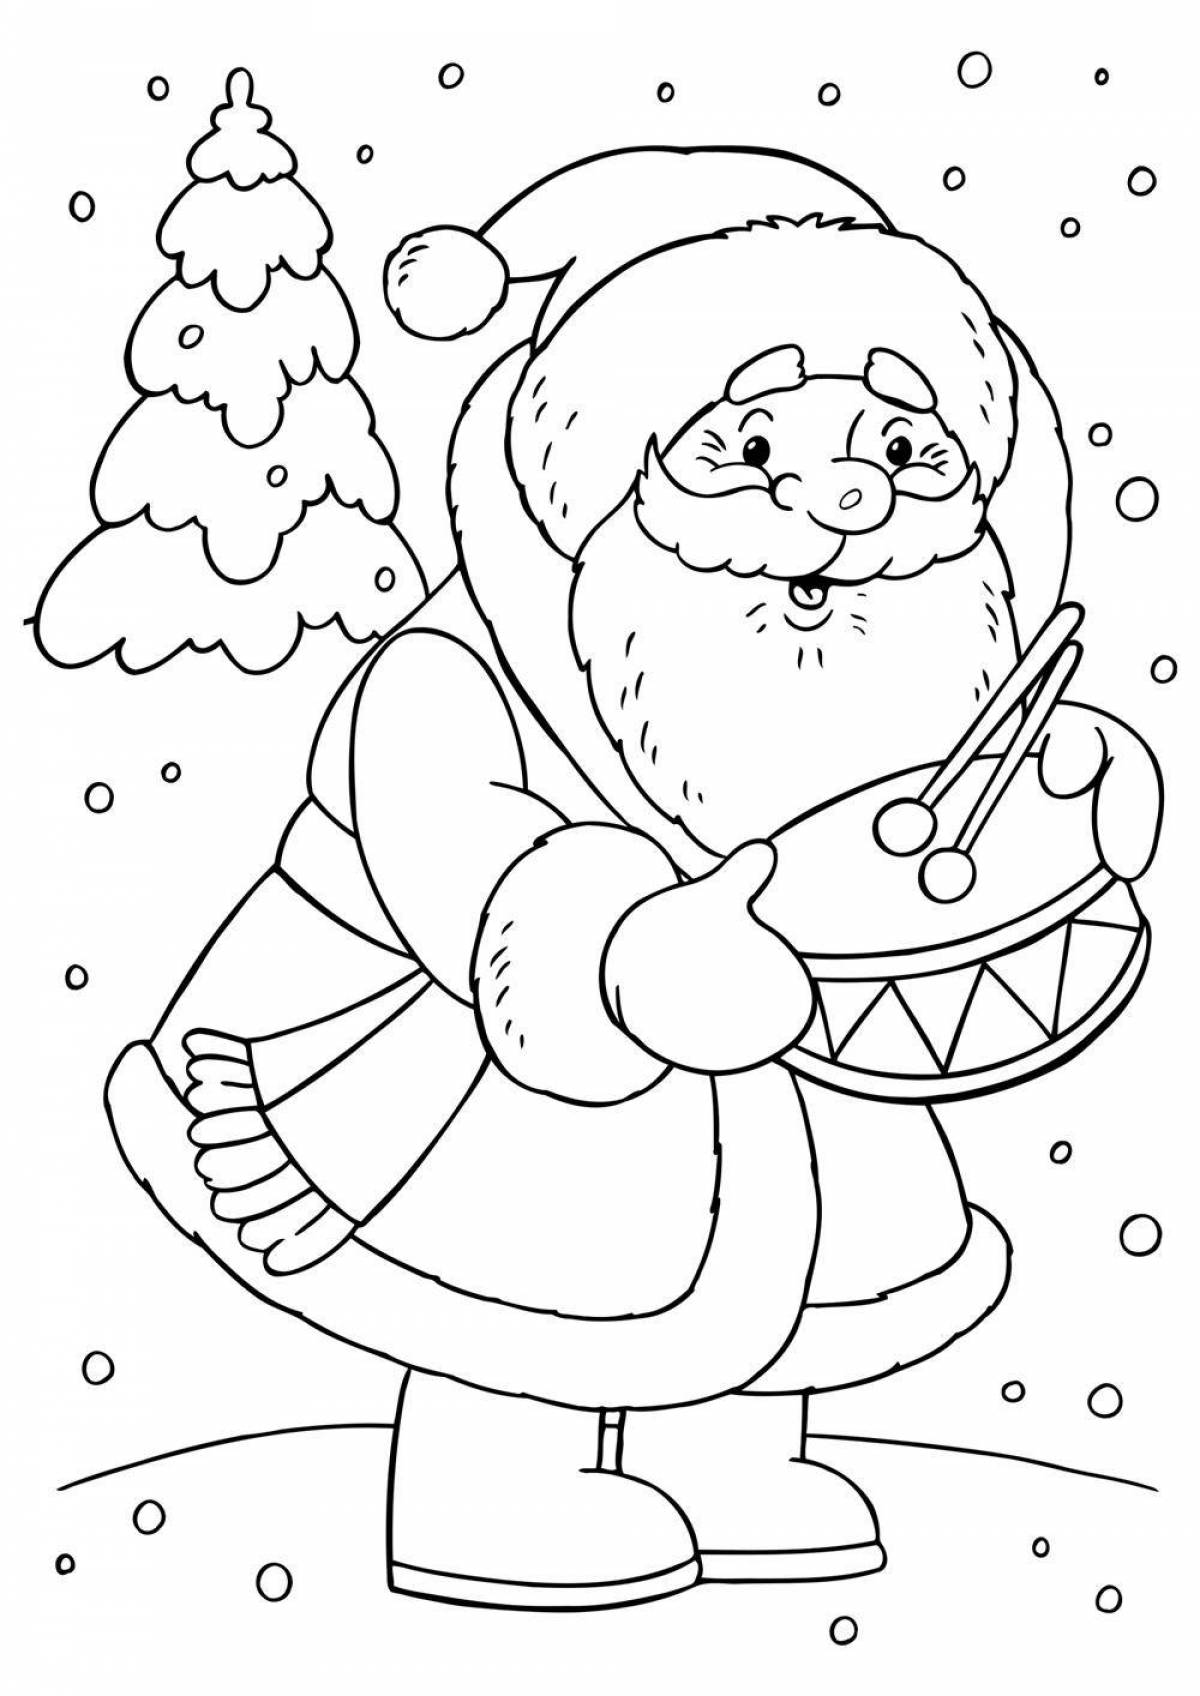 Glorious children's christmas coloring book